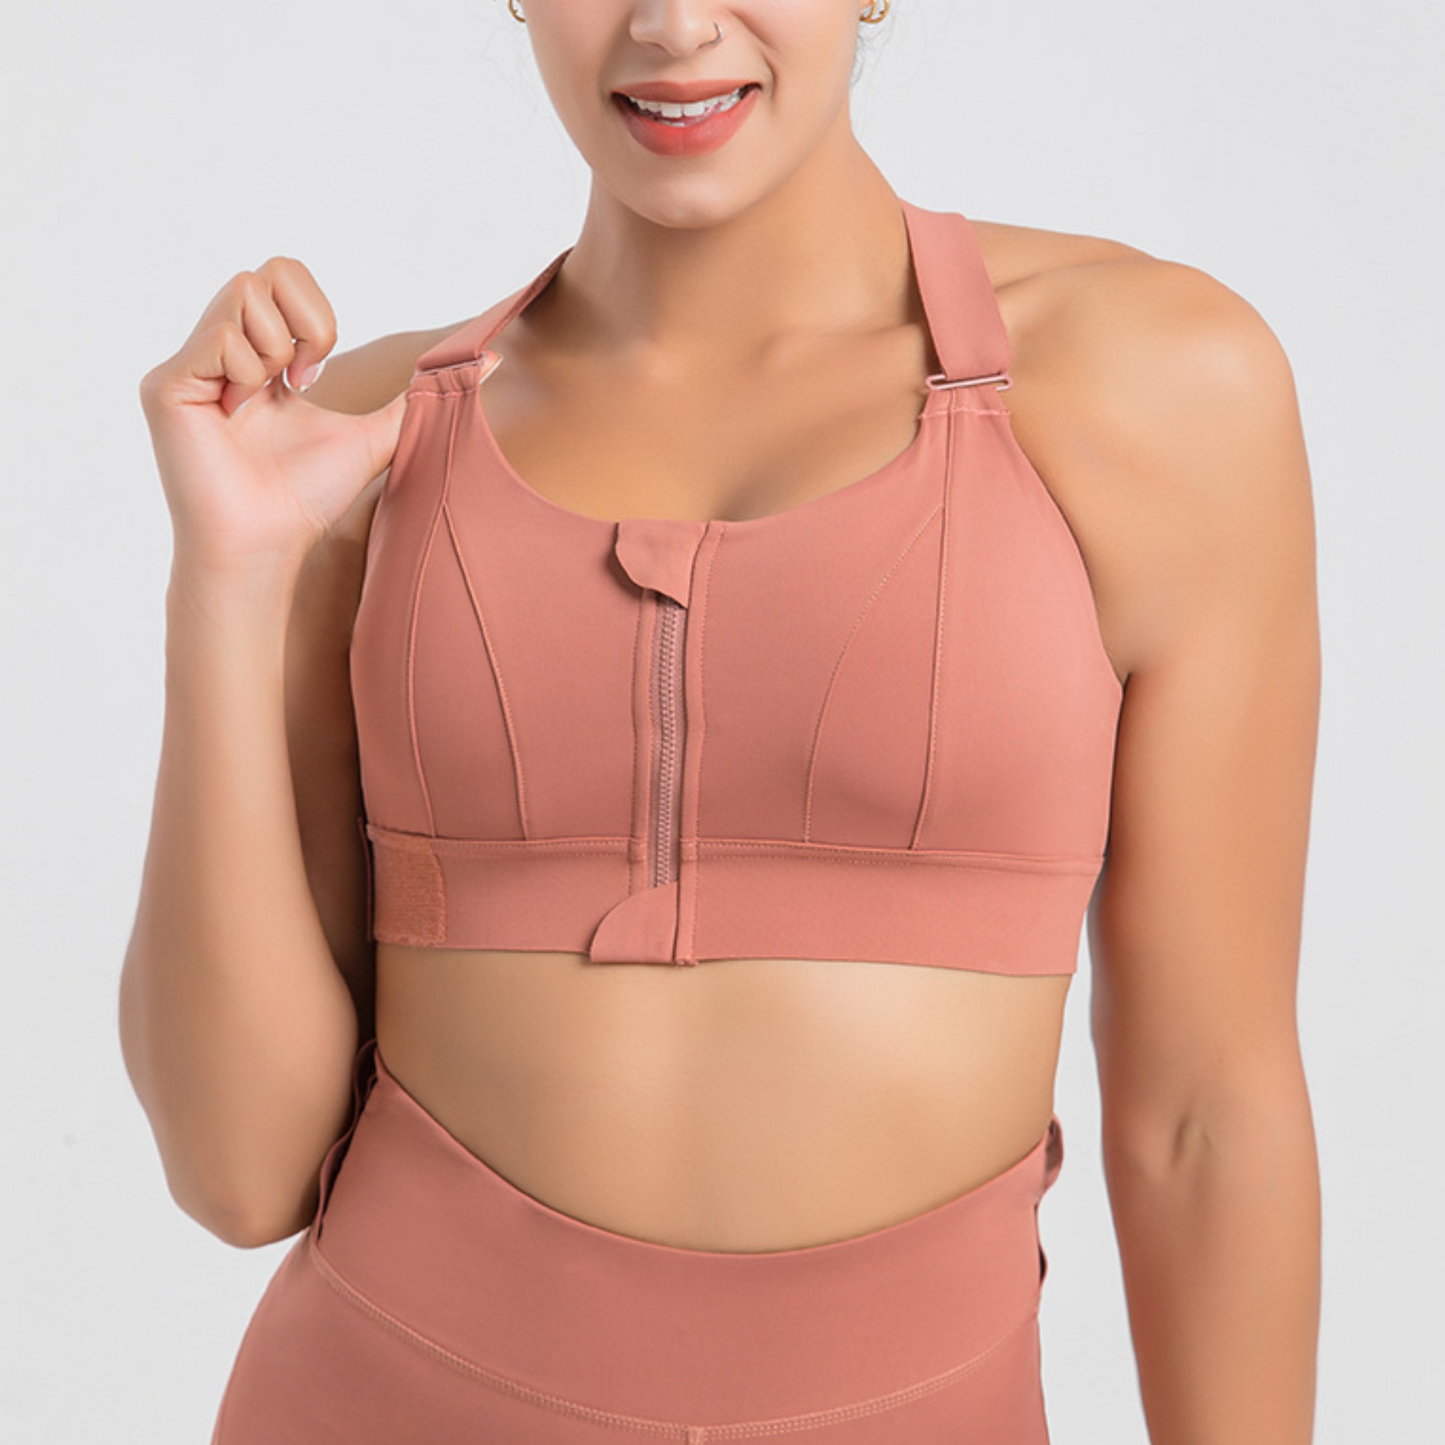 FITNESS MODEL wearing a terracota, high impact workout bra with straps that can be adjusted on the body.